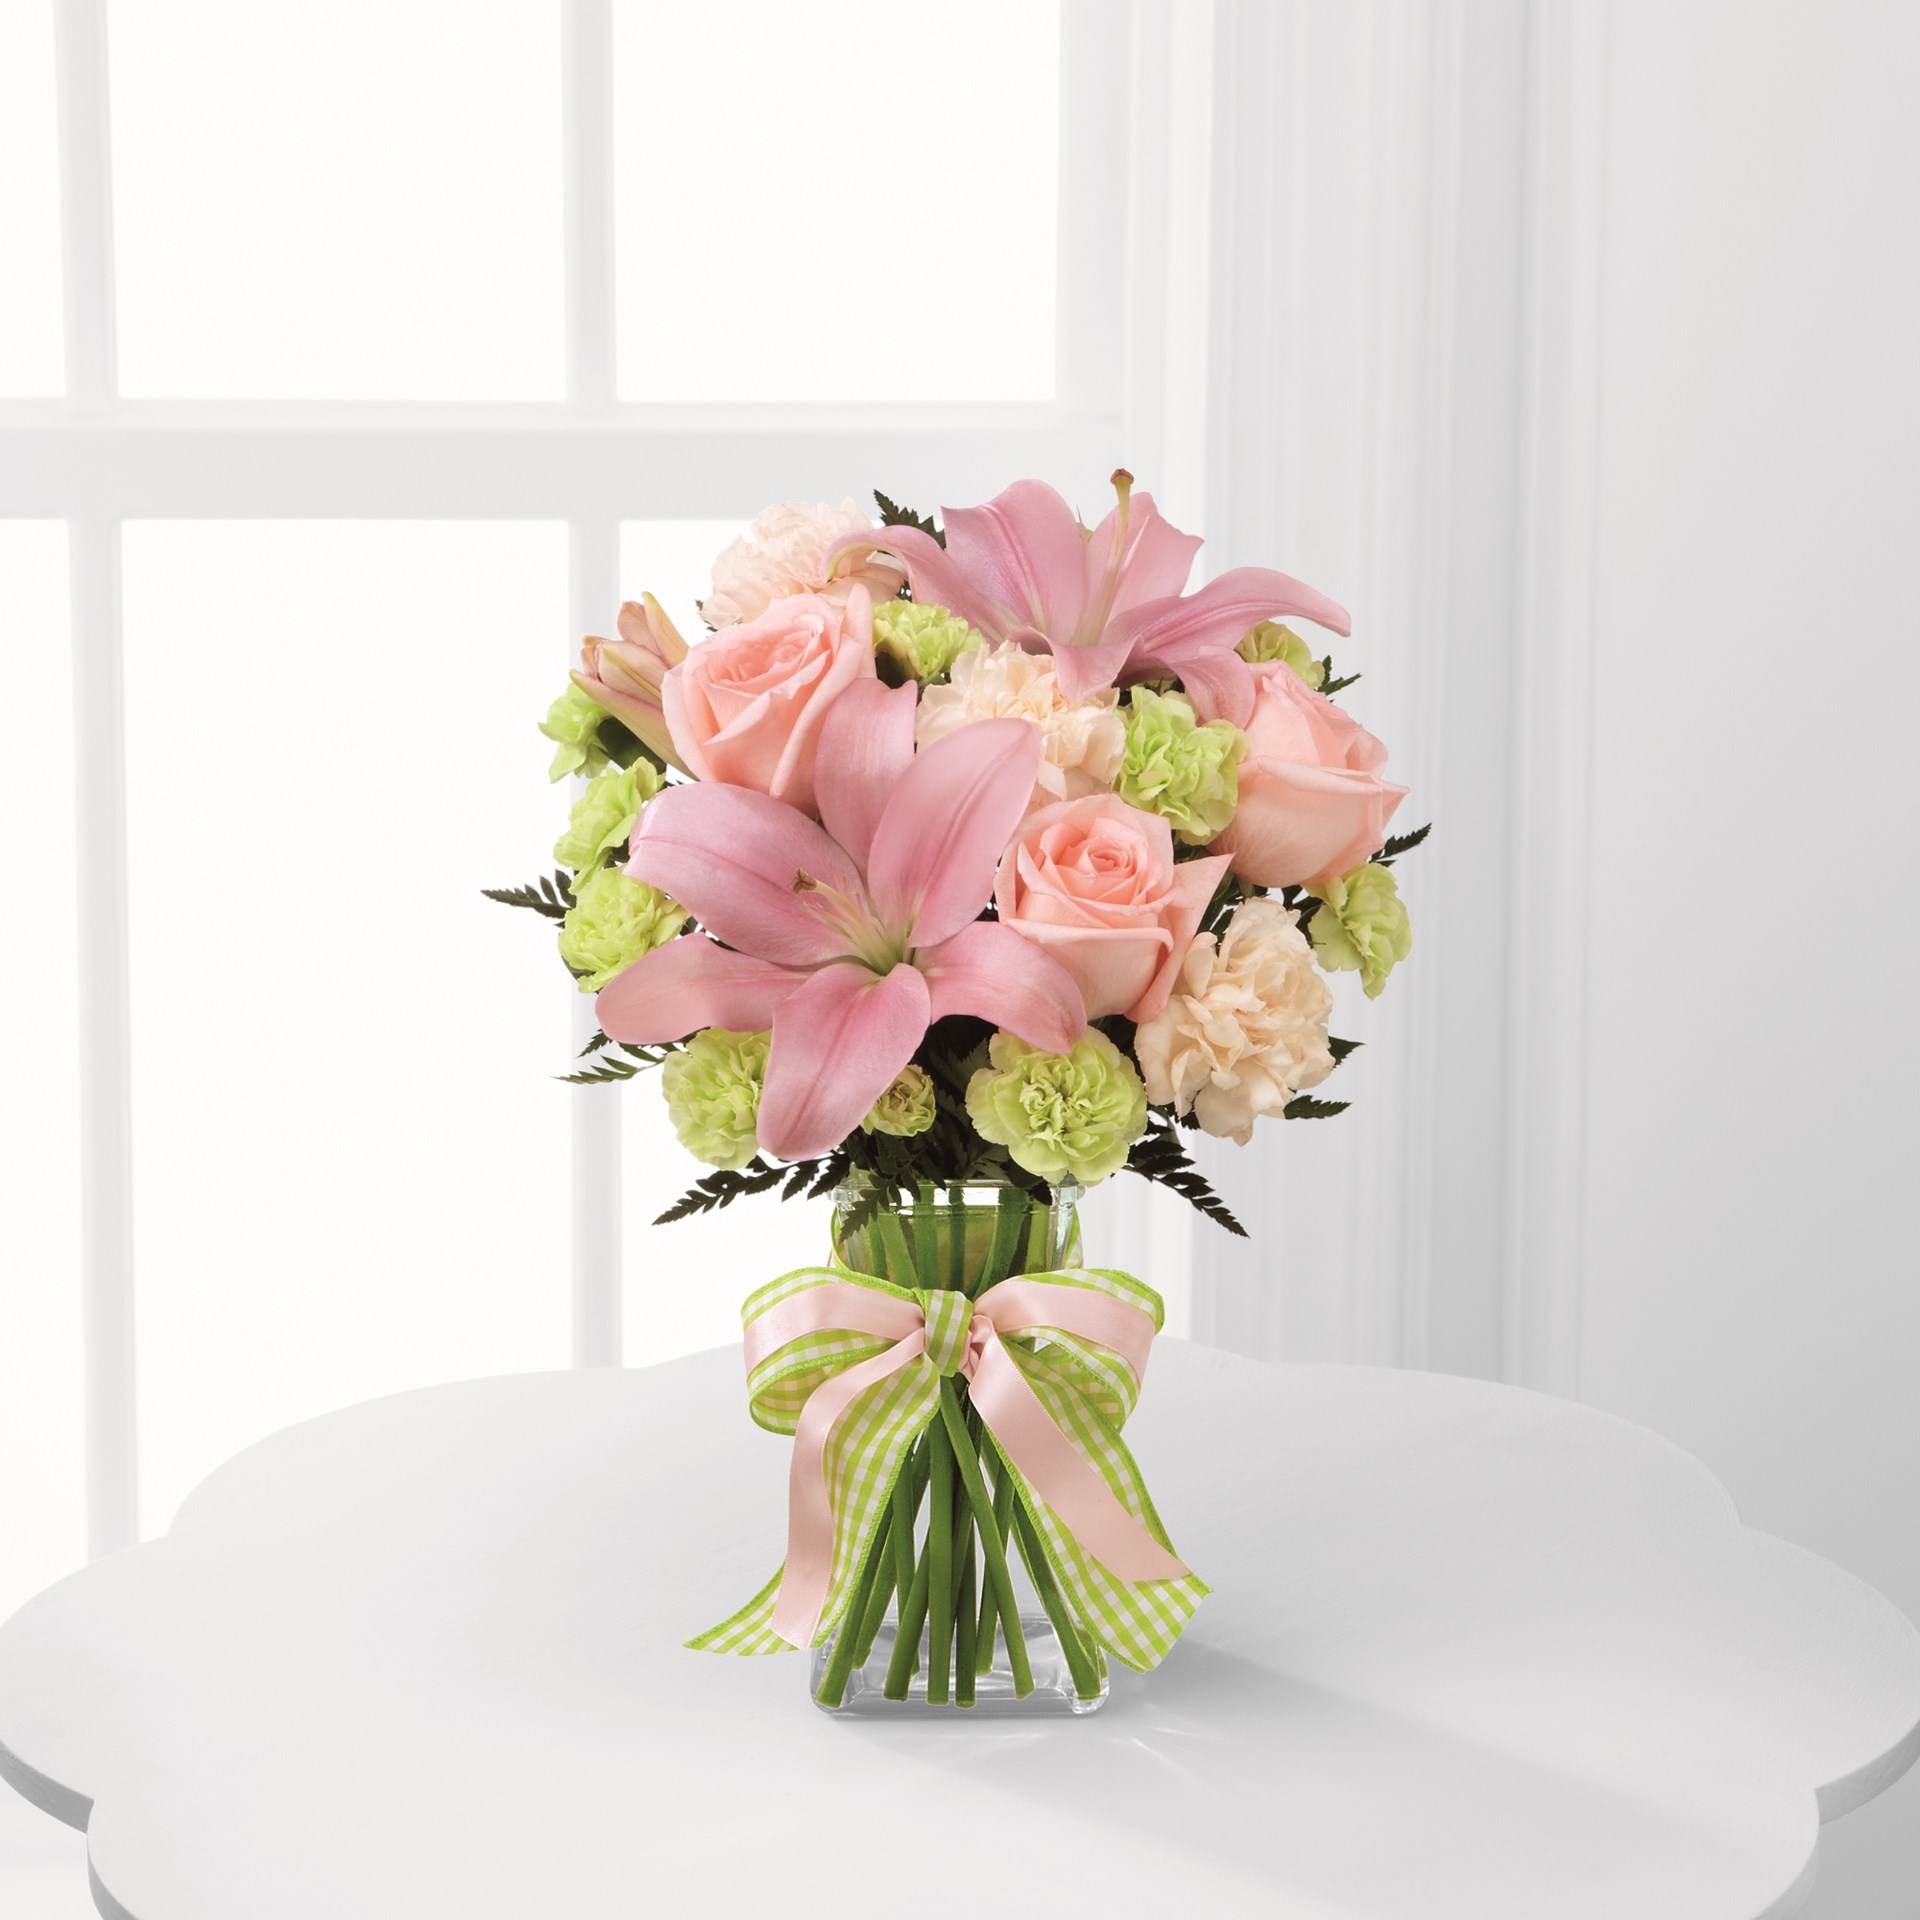 product image for The Girl Power Bouquet by FTD - VASE INCLUDED